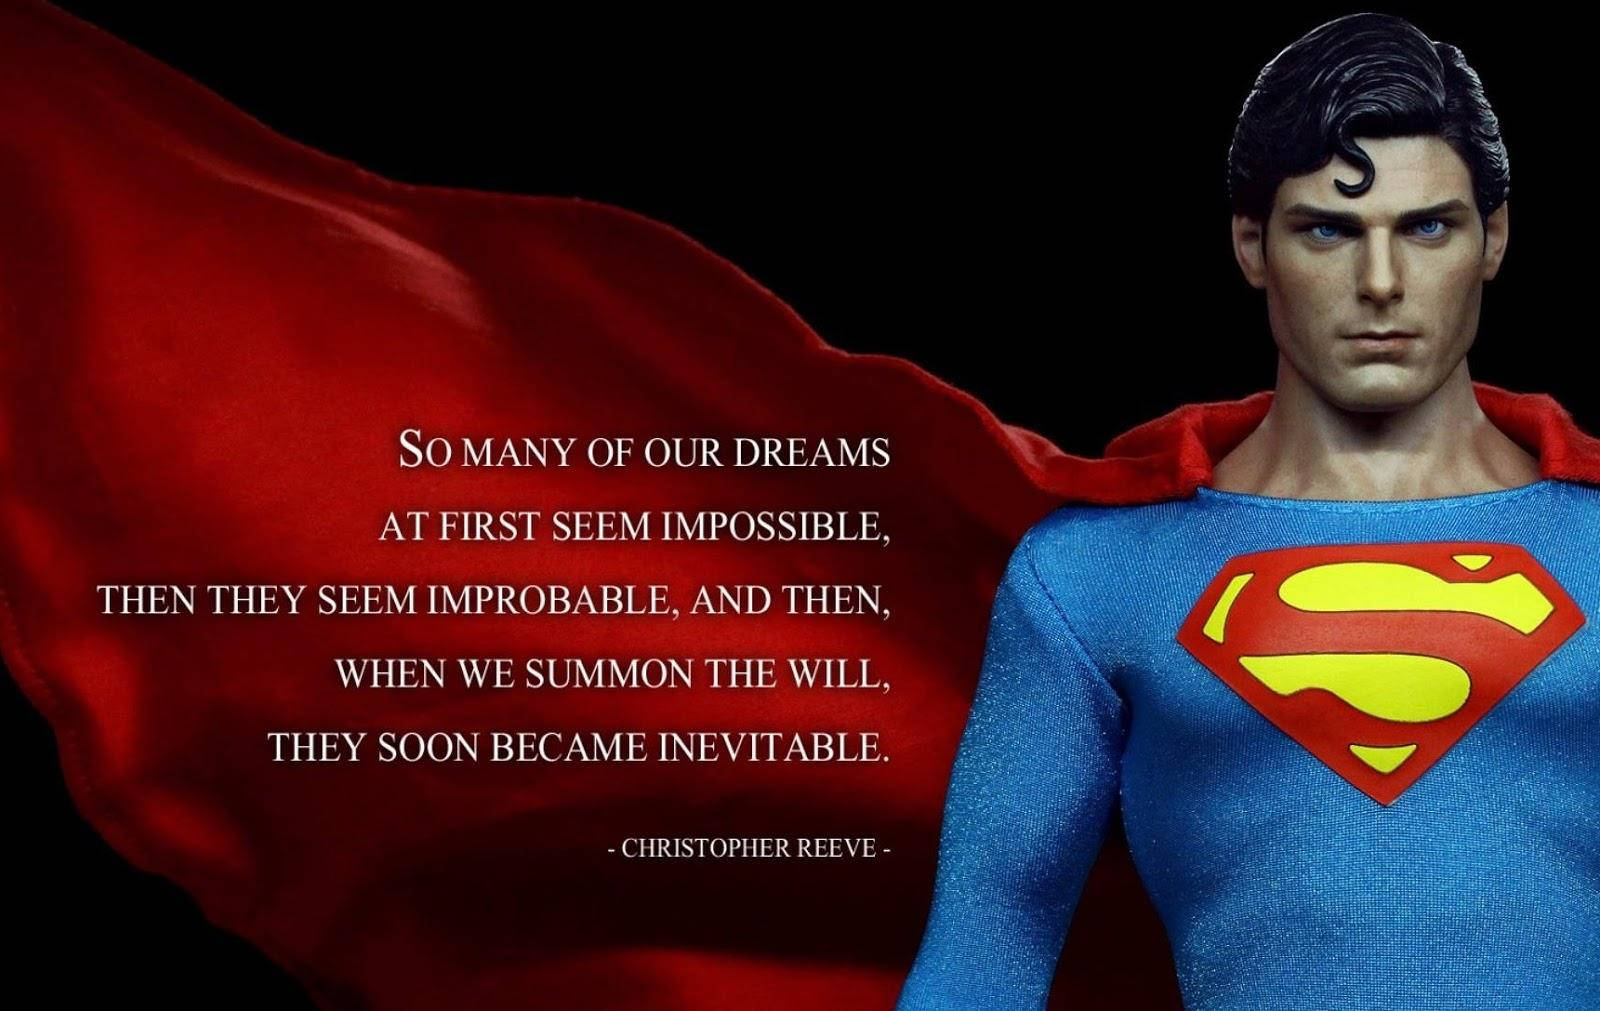 Christopher Reeve Dream Quote Wallpaper